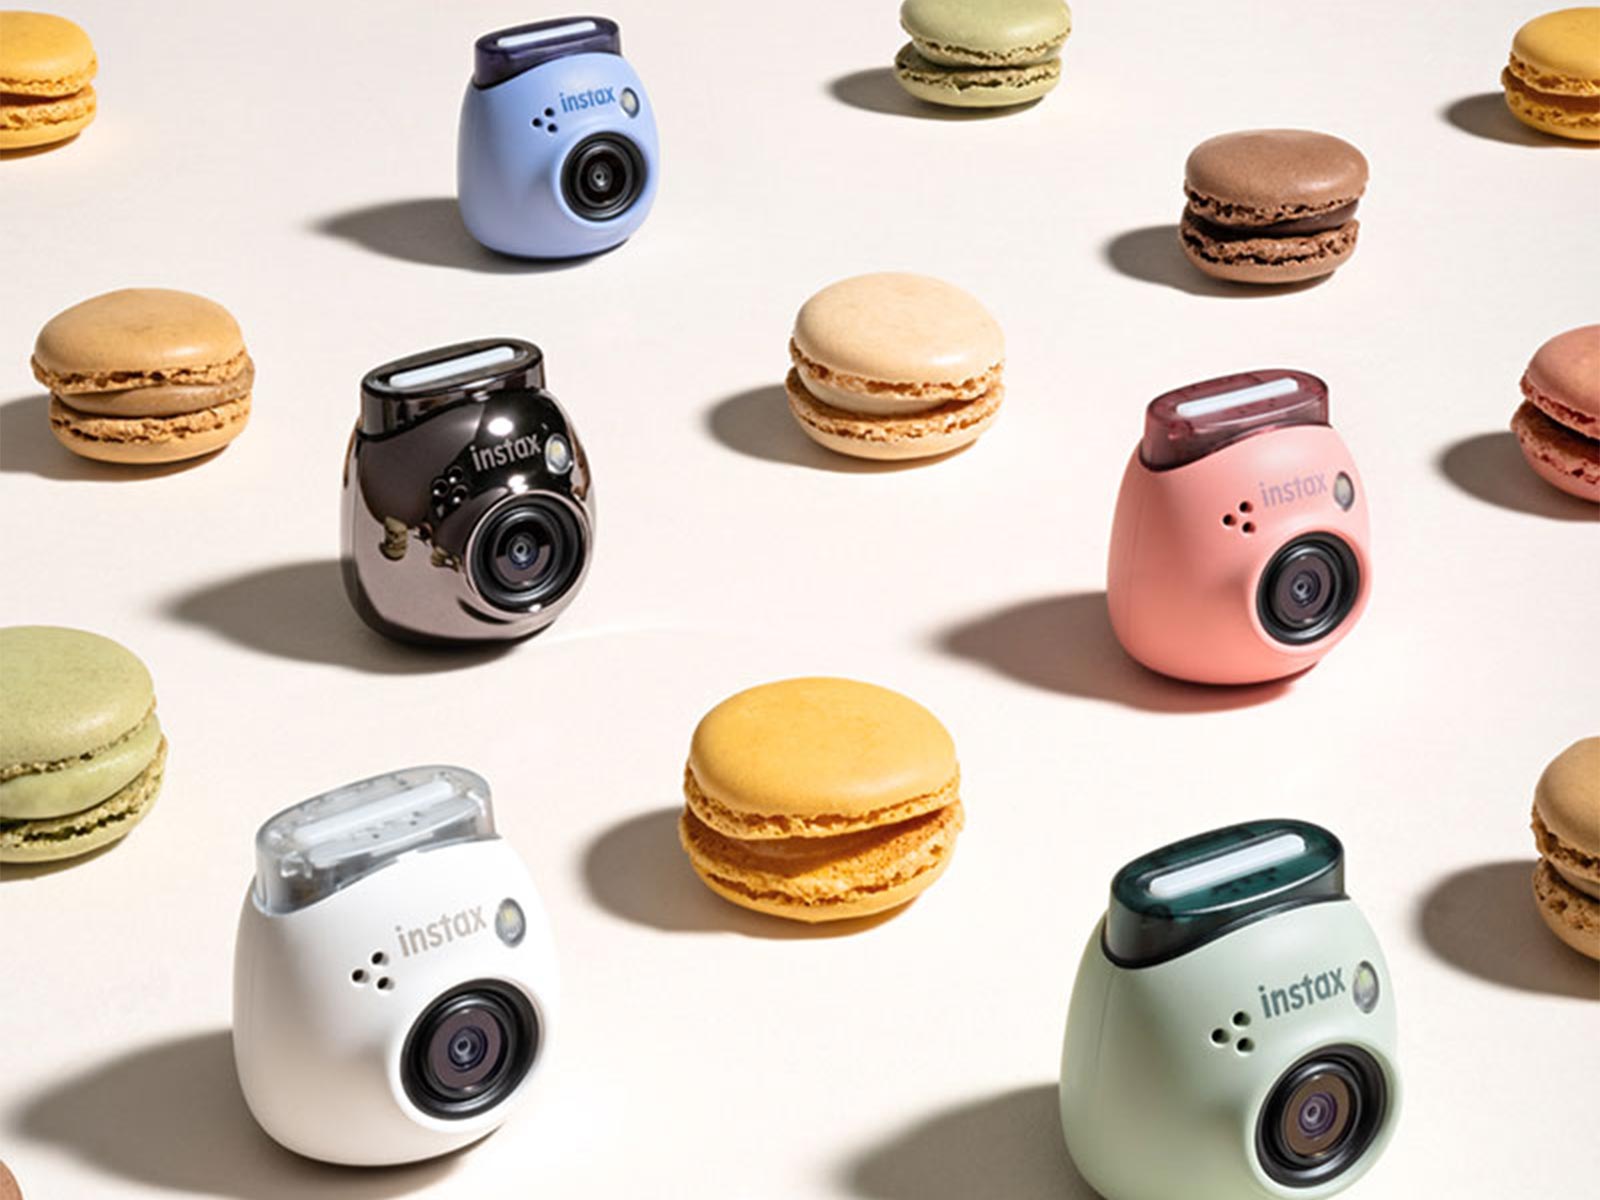 Fujifilm Instax Pal: The smallest Instax camera fits in your palm